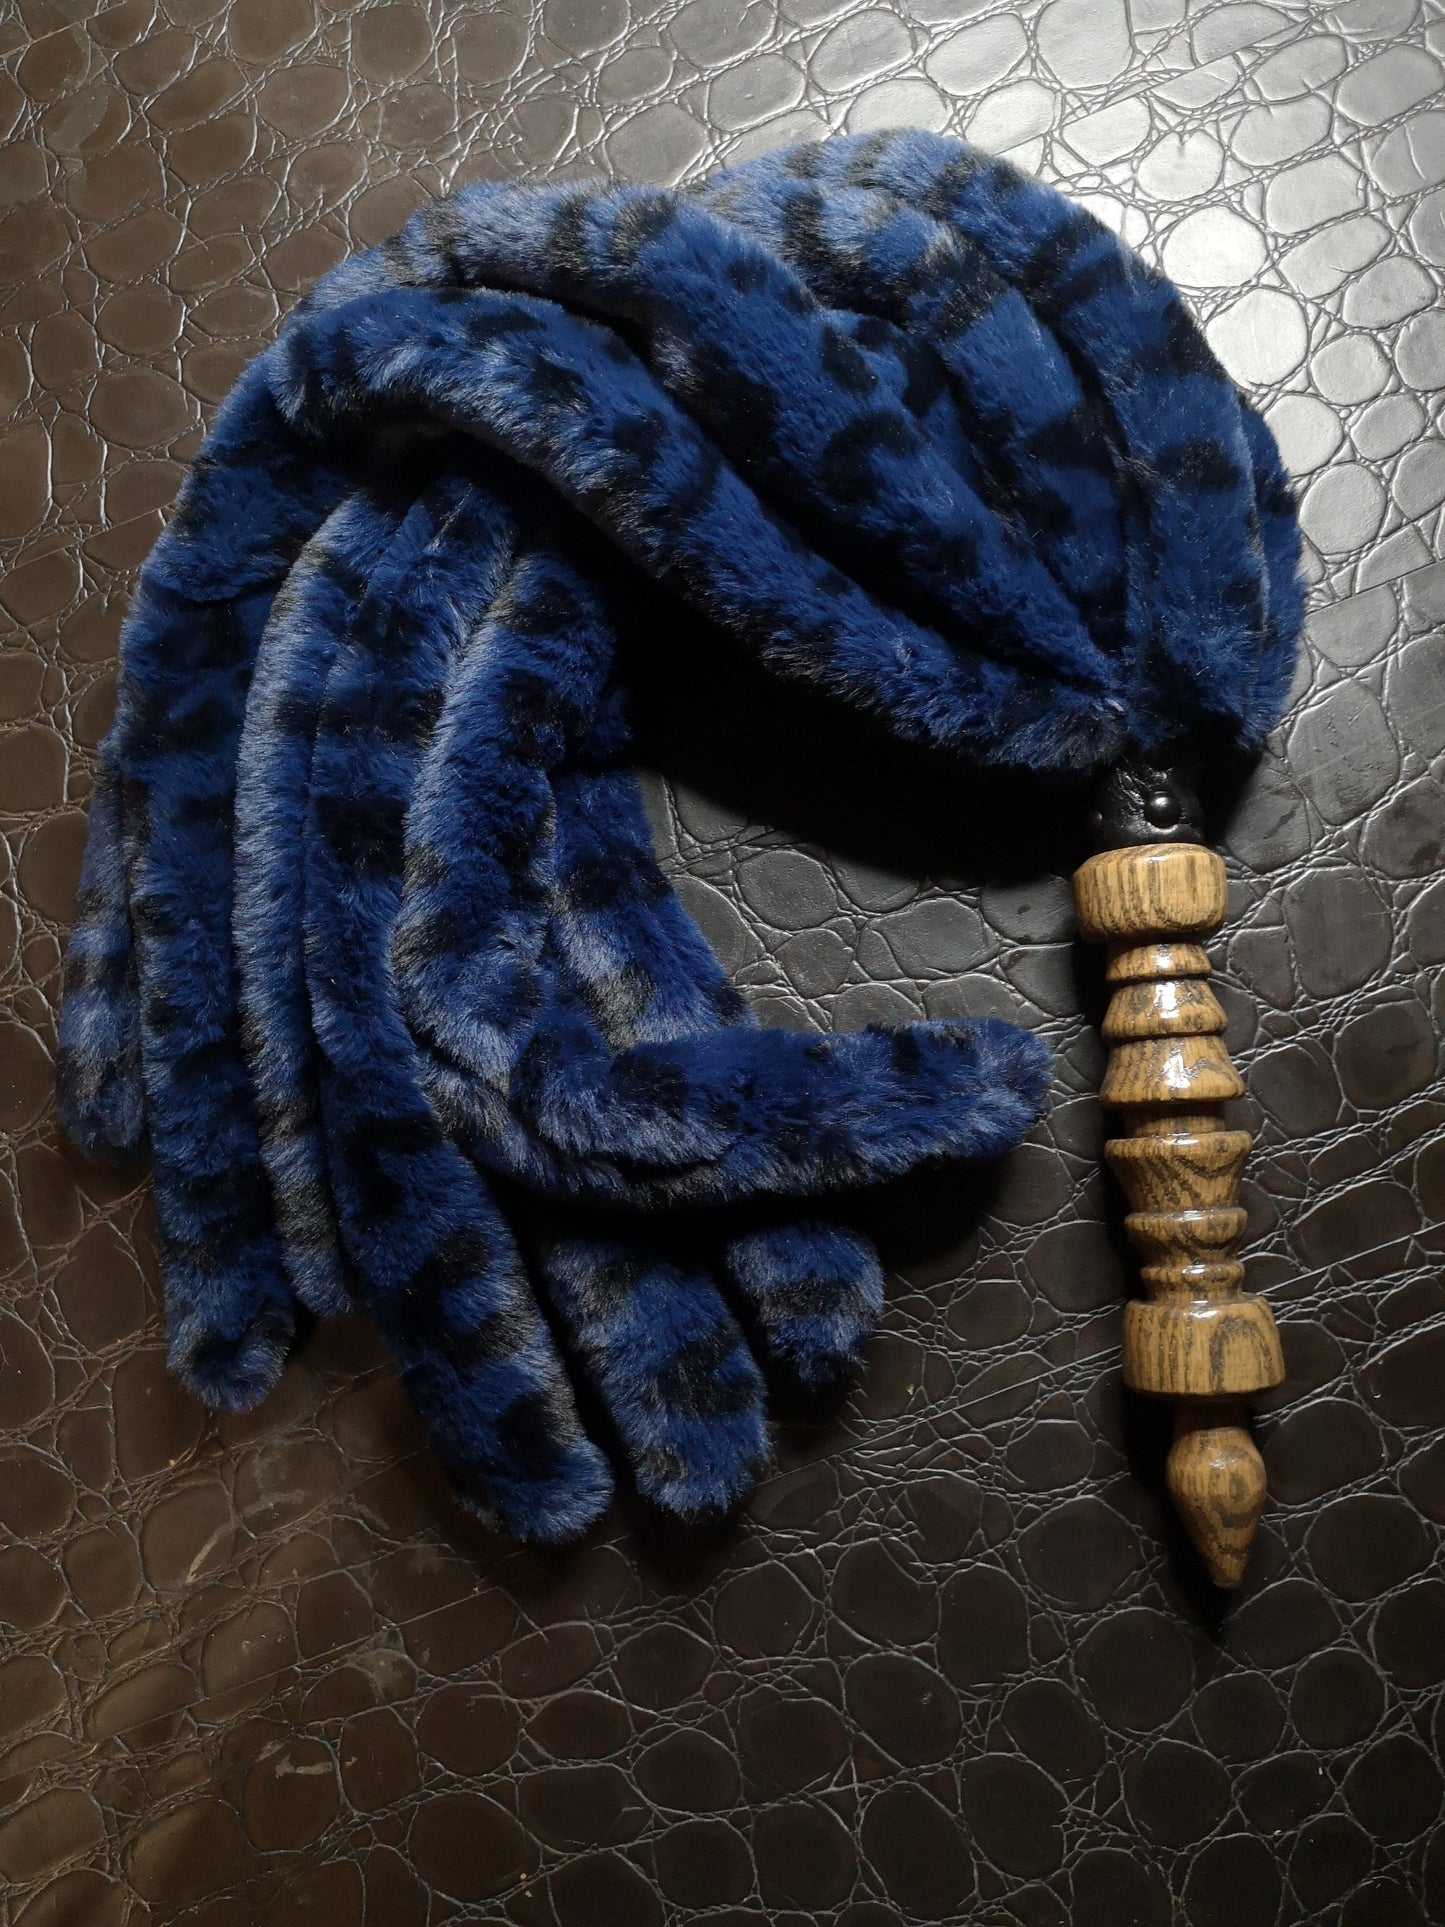 "Blue Leopard" weighted fluffy flogger